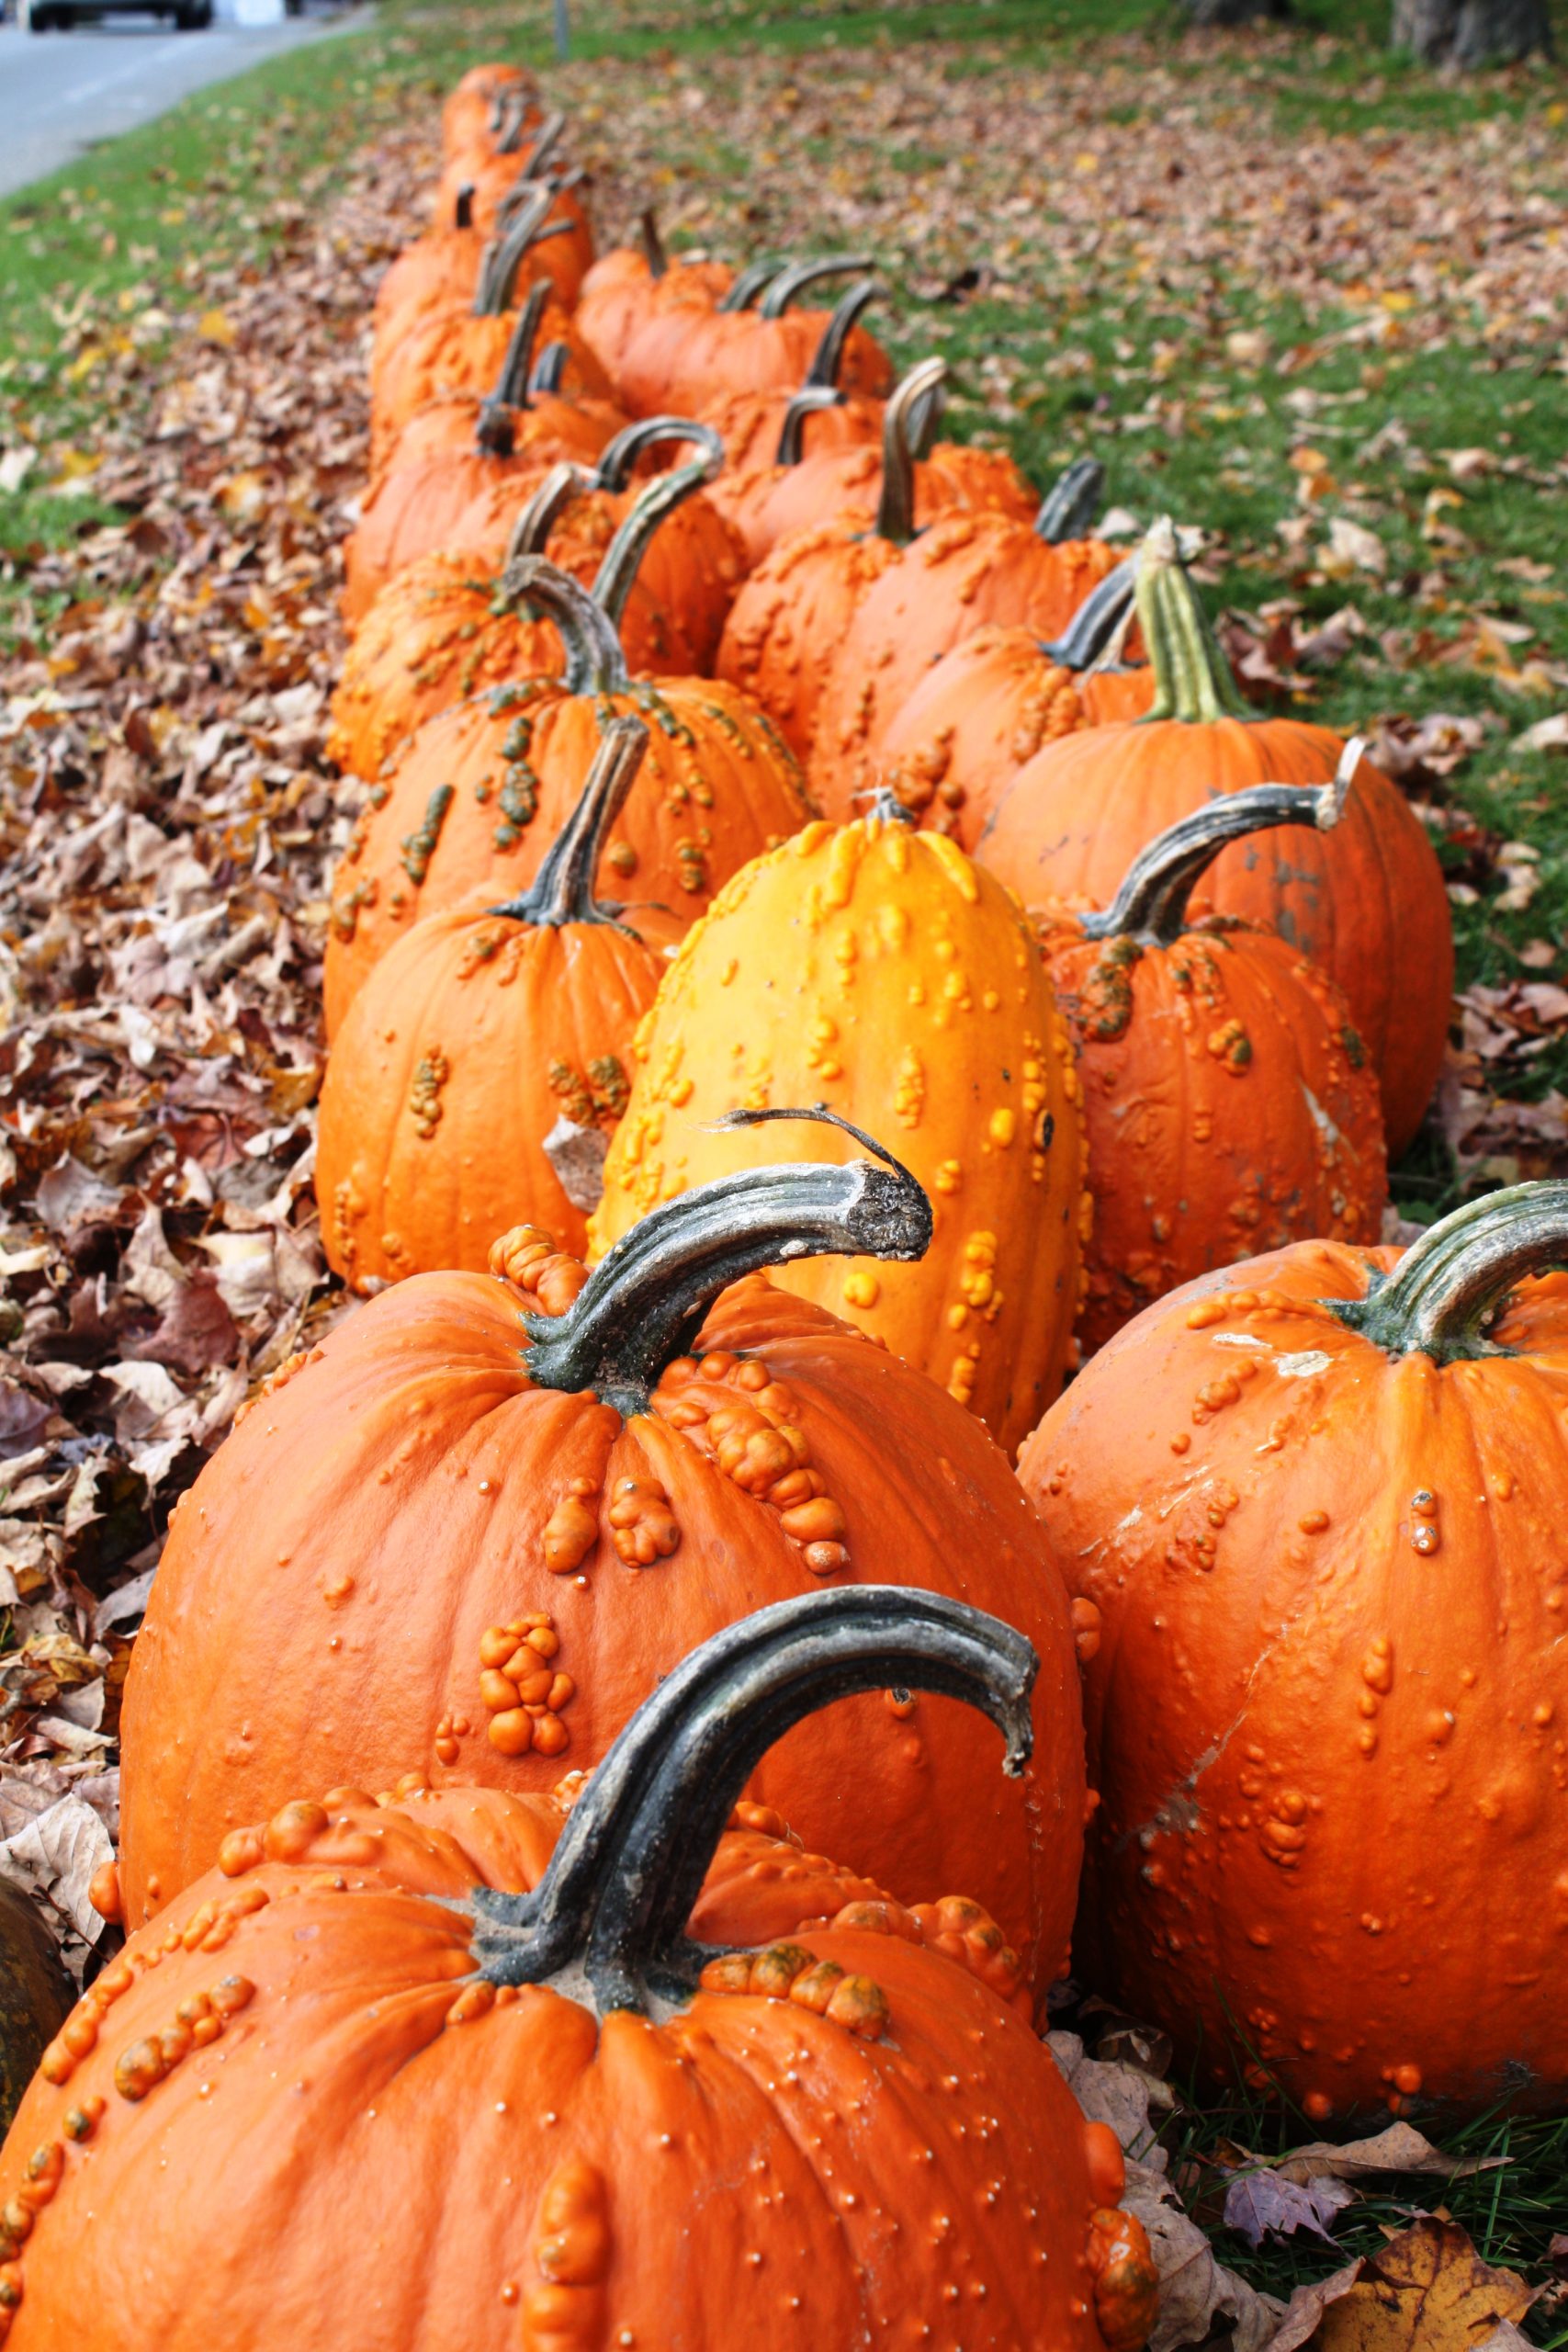 Pumpkins (user submitted)